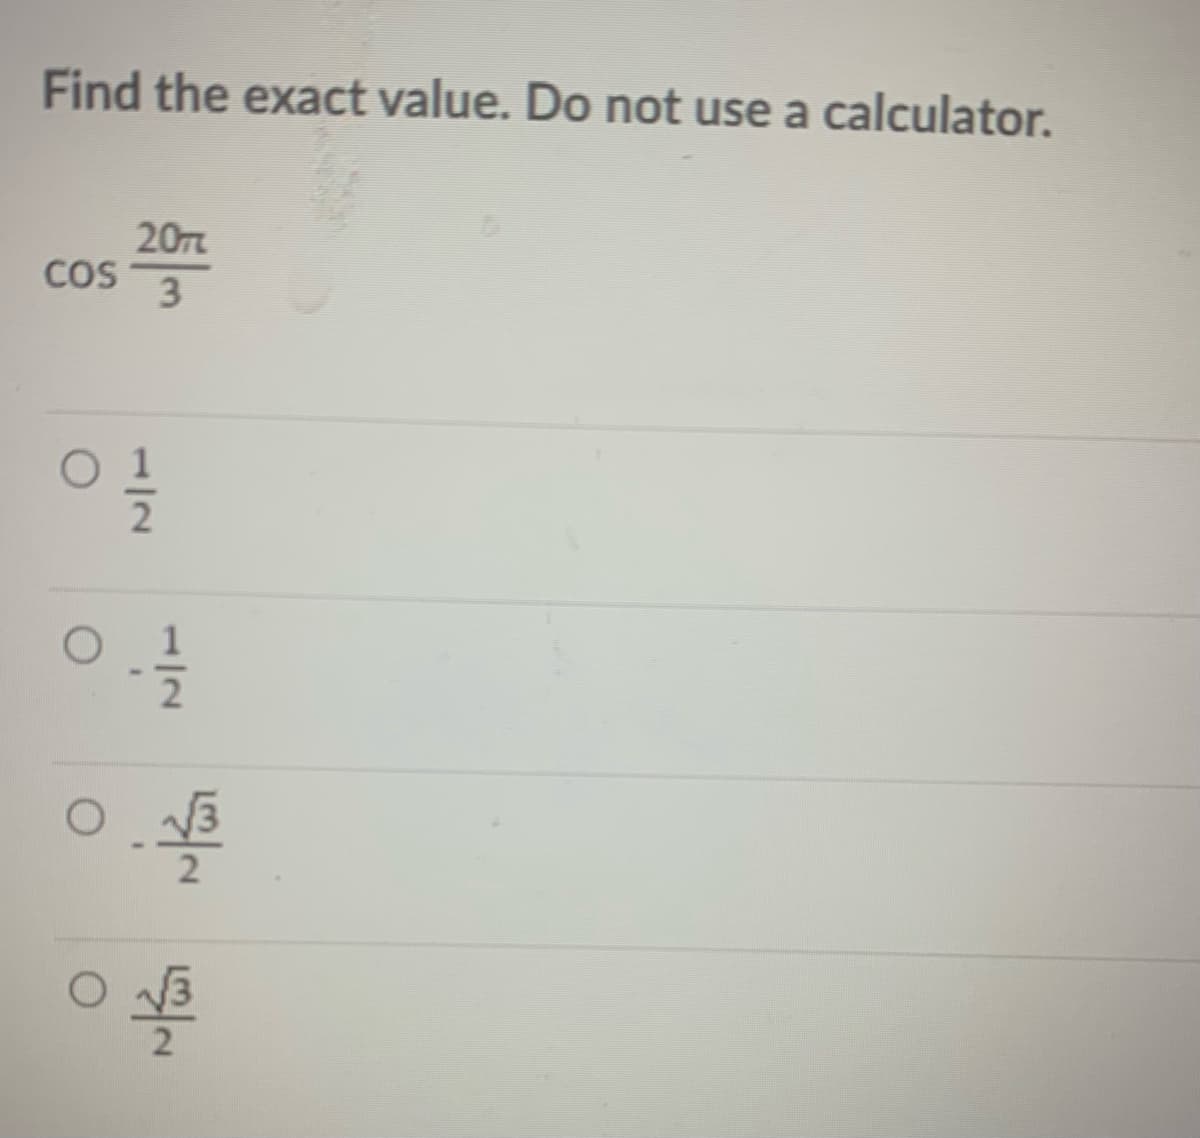 Find the exact value. Do not use a calculator.
20TL
COS
3.
1/2
1/2
